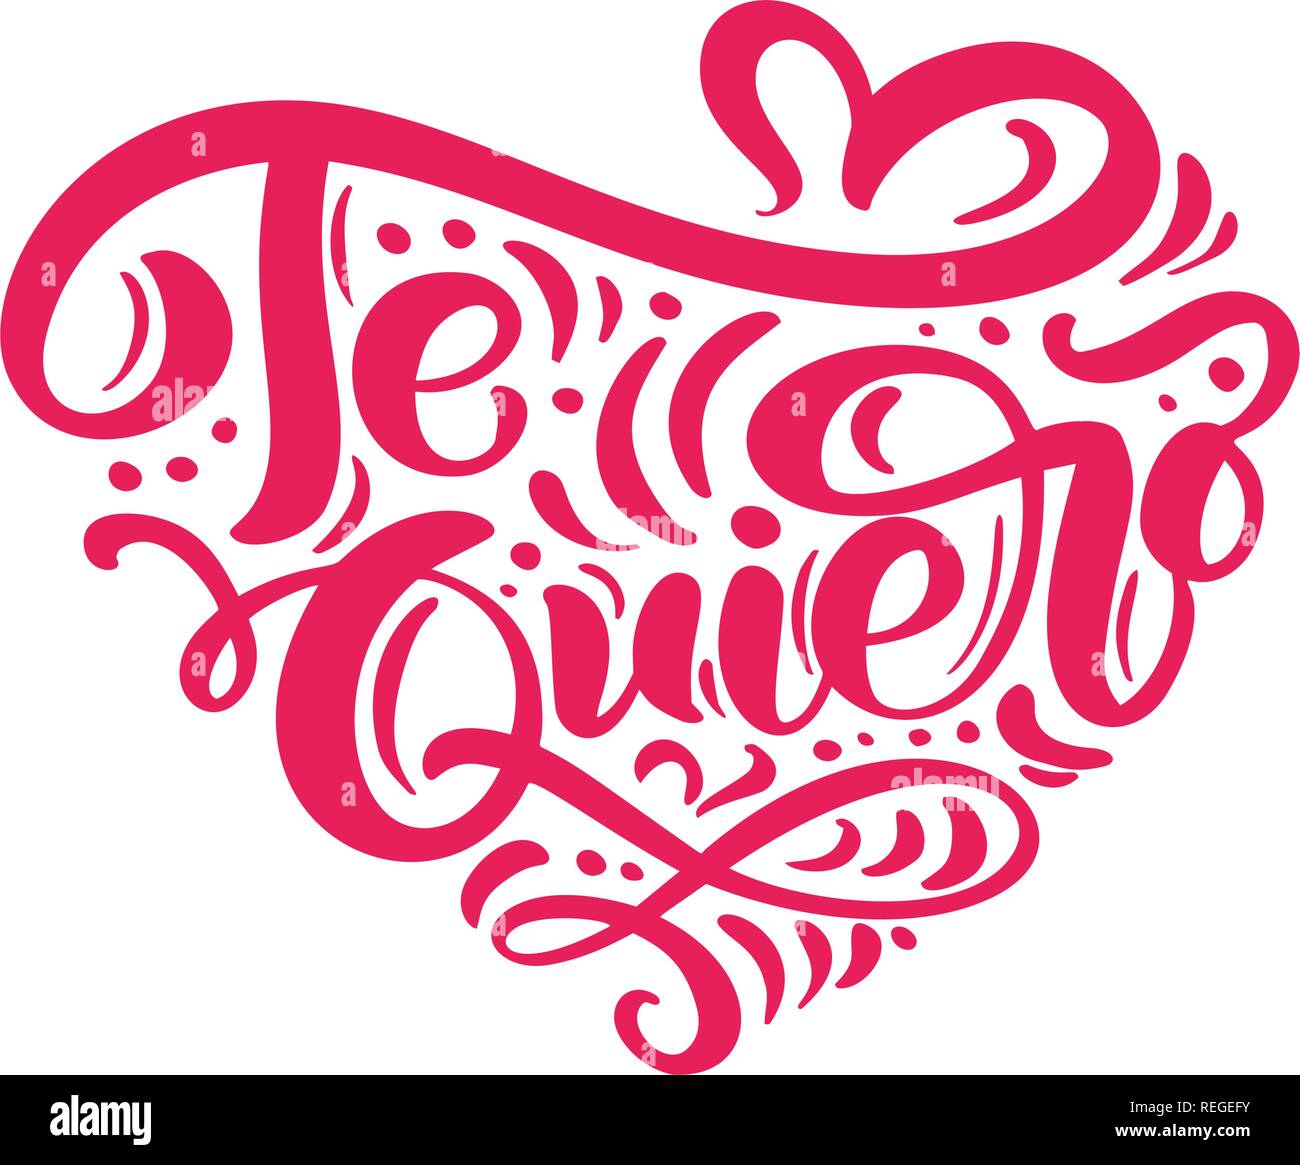 Calligraphy phrase Te Quiero on Spanish - I Love You. Vector Valentines Day Hand Drawn lettering. Heart Holiday sketch doodle Design valentine card. decor for web, wedding and print. Isolated illustration Stock Vector